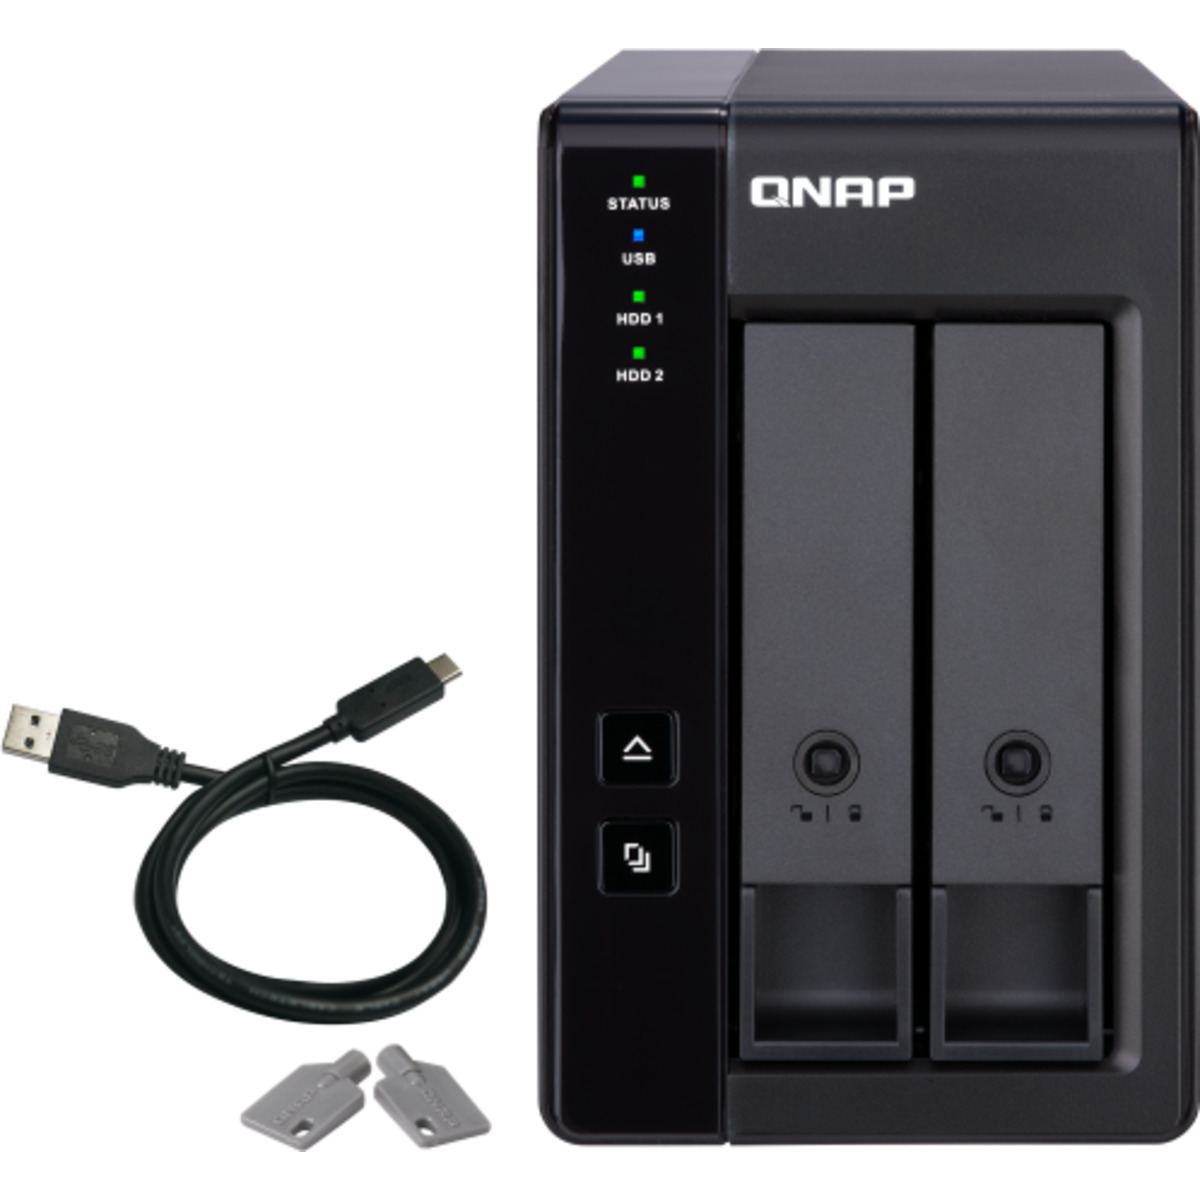 QNAP TR-002 External Expansion Drive 24tb 2-Bay Desktop Multimedia / Power User / Business Expansion Enclosure 1x24tb Western Digital Ultrastar HC580 SED WUH722424ALE6L1 3.5 7200rpm SATA 6Gb/s HDD ENTERPRISE Class Drives Installed - Burn-In Tested TR-002 External Expansion Drive